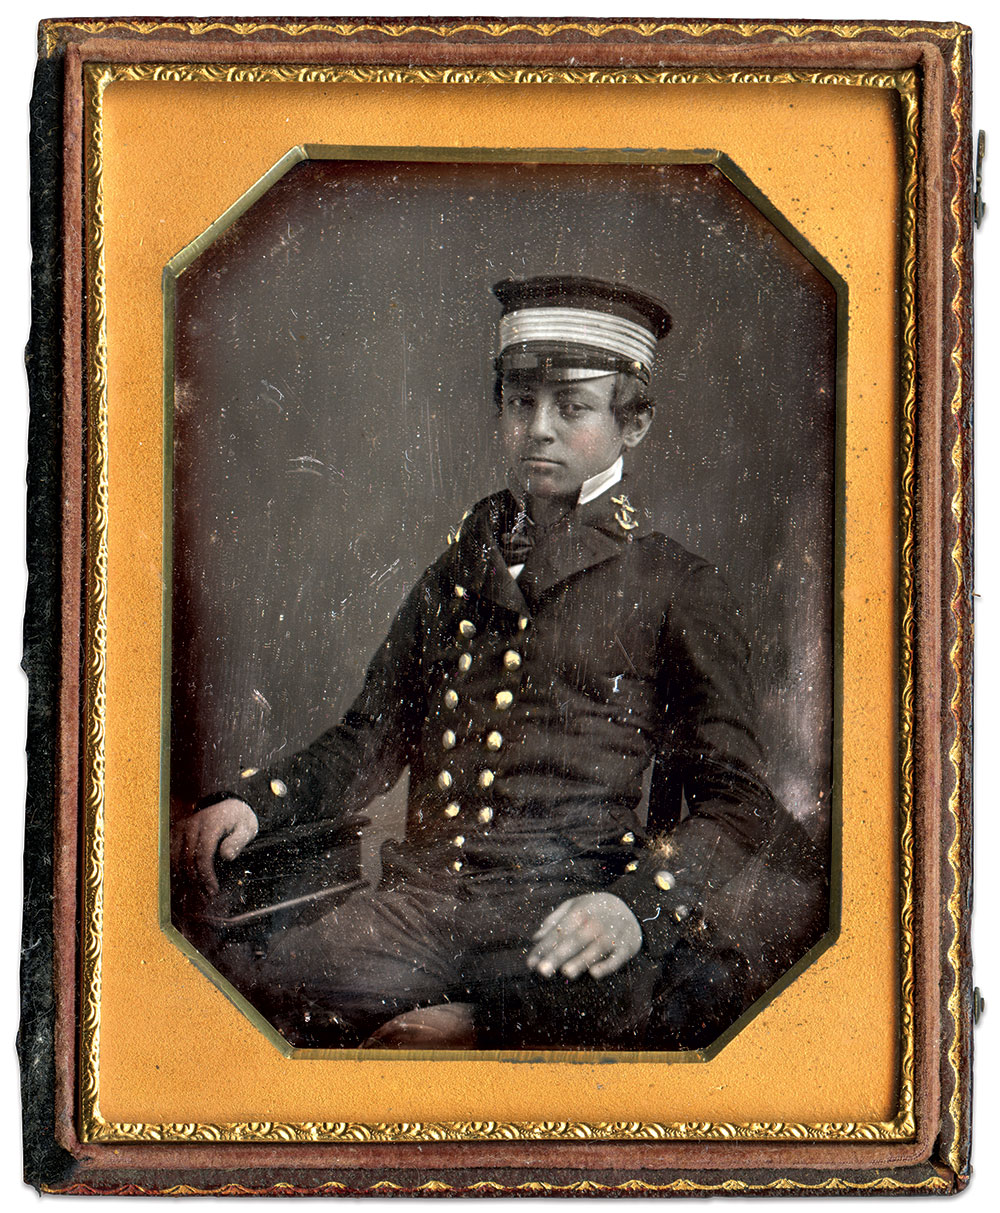 Quarter-plate daguerreotype by an anonymous photographer.   